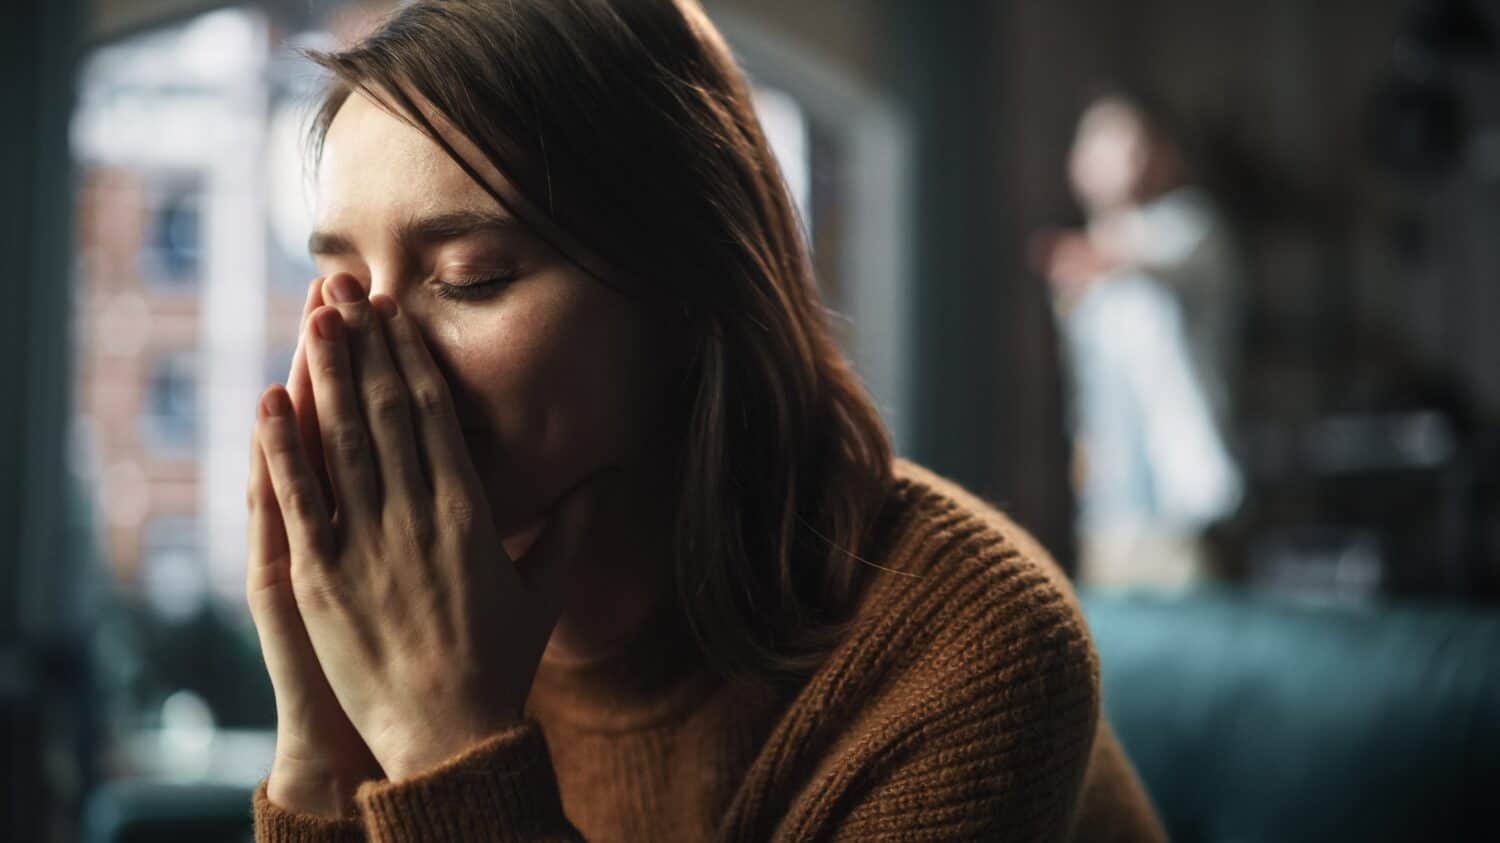 Portrait of Sad Crying Woman being Harrased and Bullied by Her Partner. Couple Arguing and Fighting Violently. Domestic Violence and Emotional Abuse. Rack Focus with Boyfriend Screaming in Background